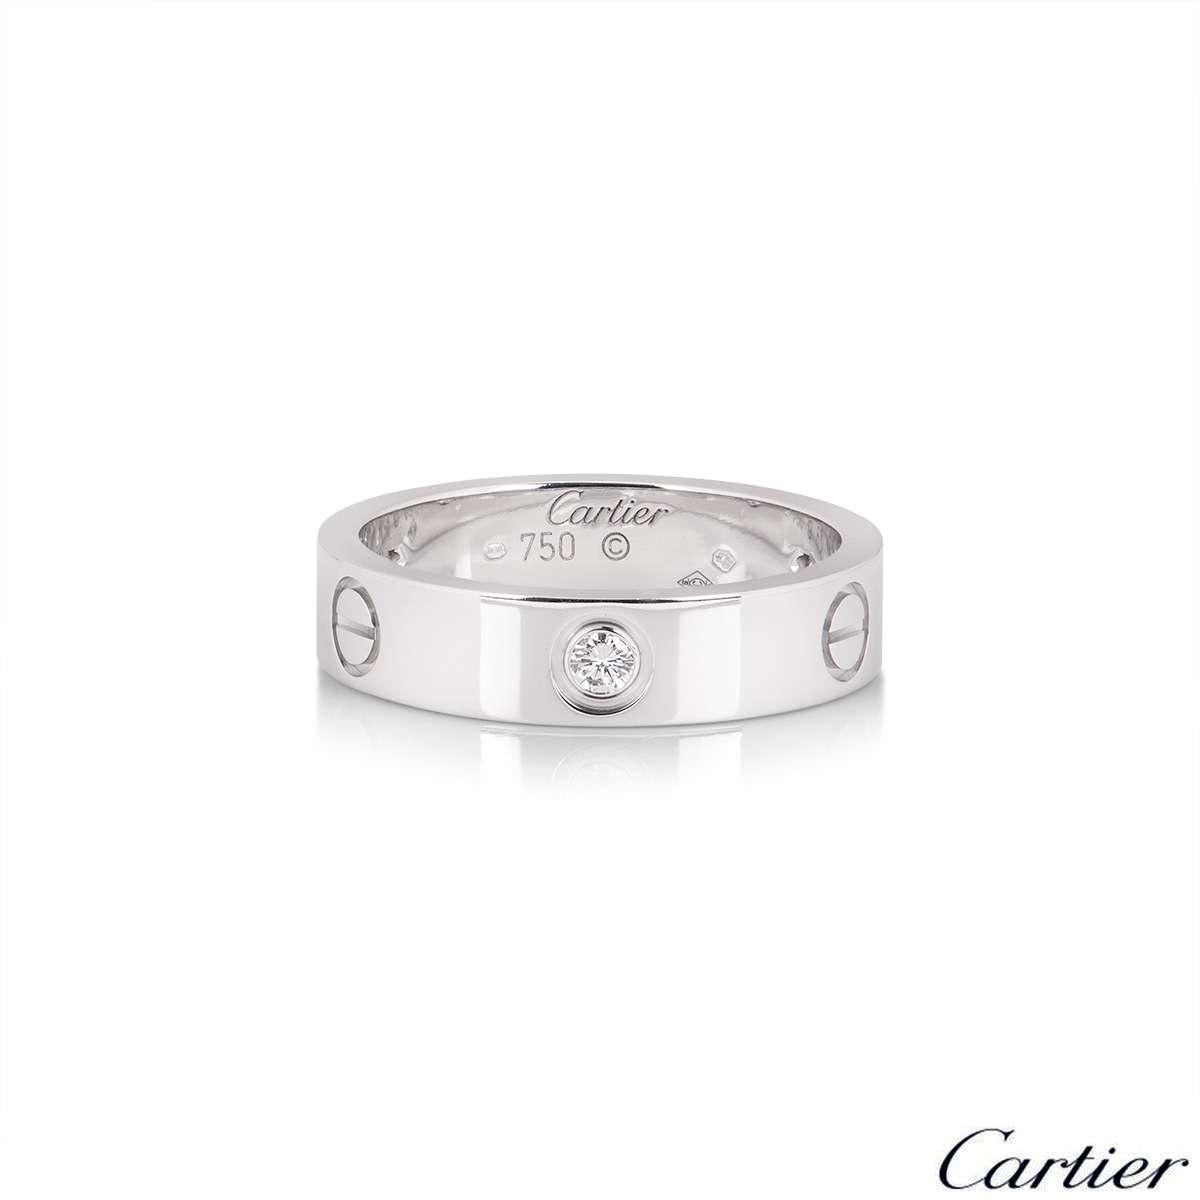 An 18k white gold ring from the iconic Love collection by Cartier B4032500. The ring is set with 3 round brilliant cut diamonds in a rub-over setting totalling 0.22ct, alternating between the iconic screw motif through the centre of the band. The